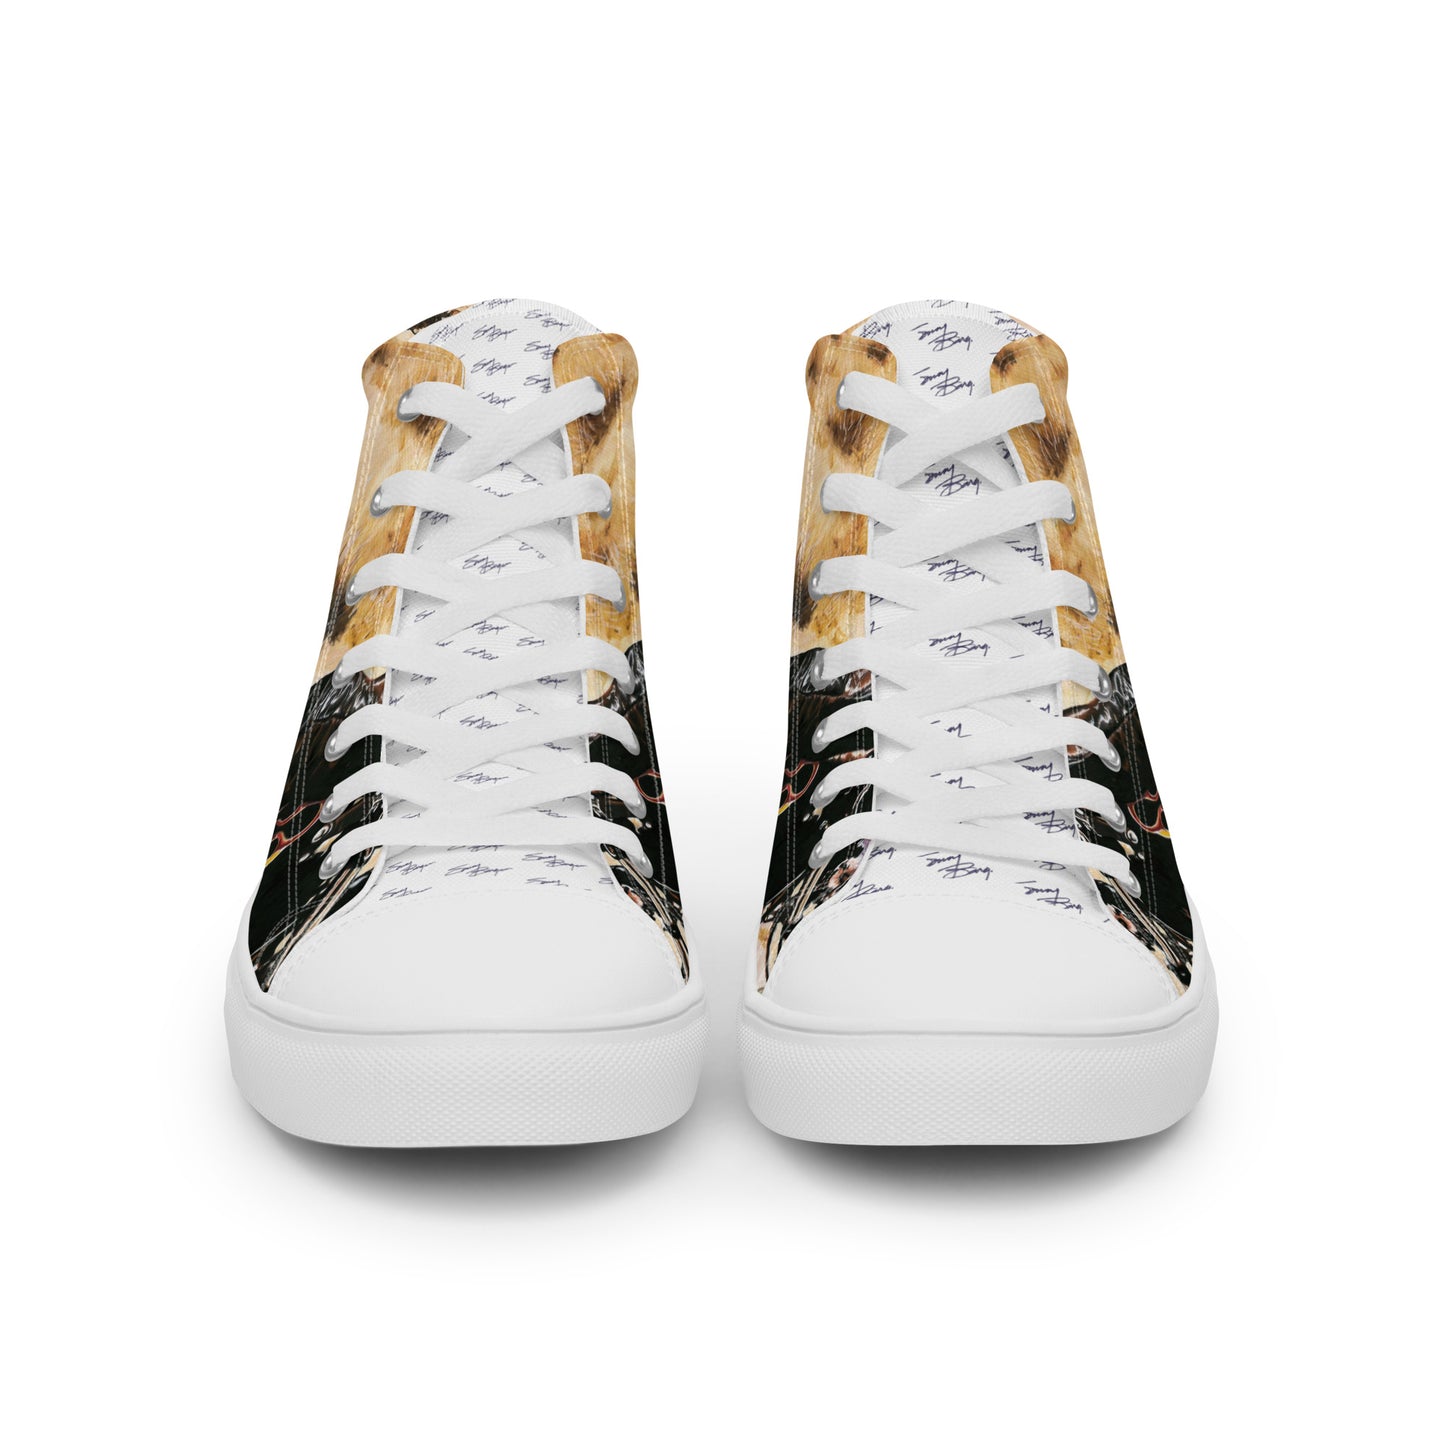 Sonny's Women’s high top canvas shoes-2 colors available